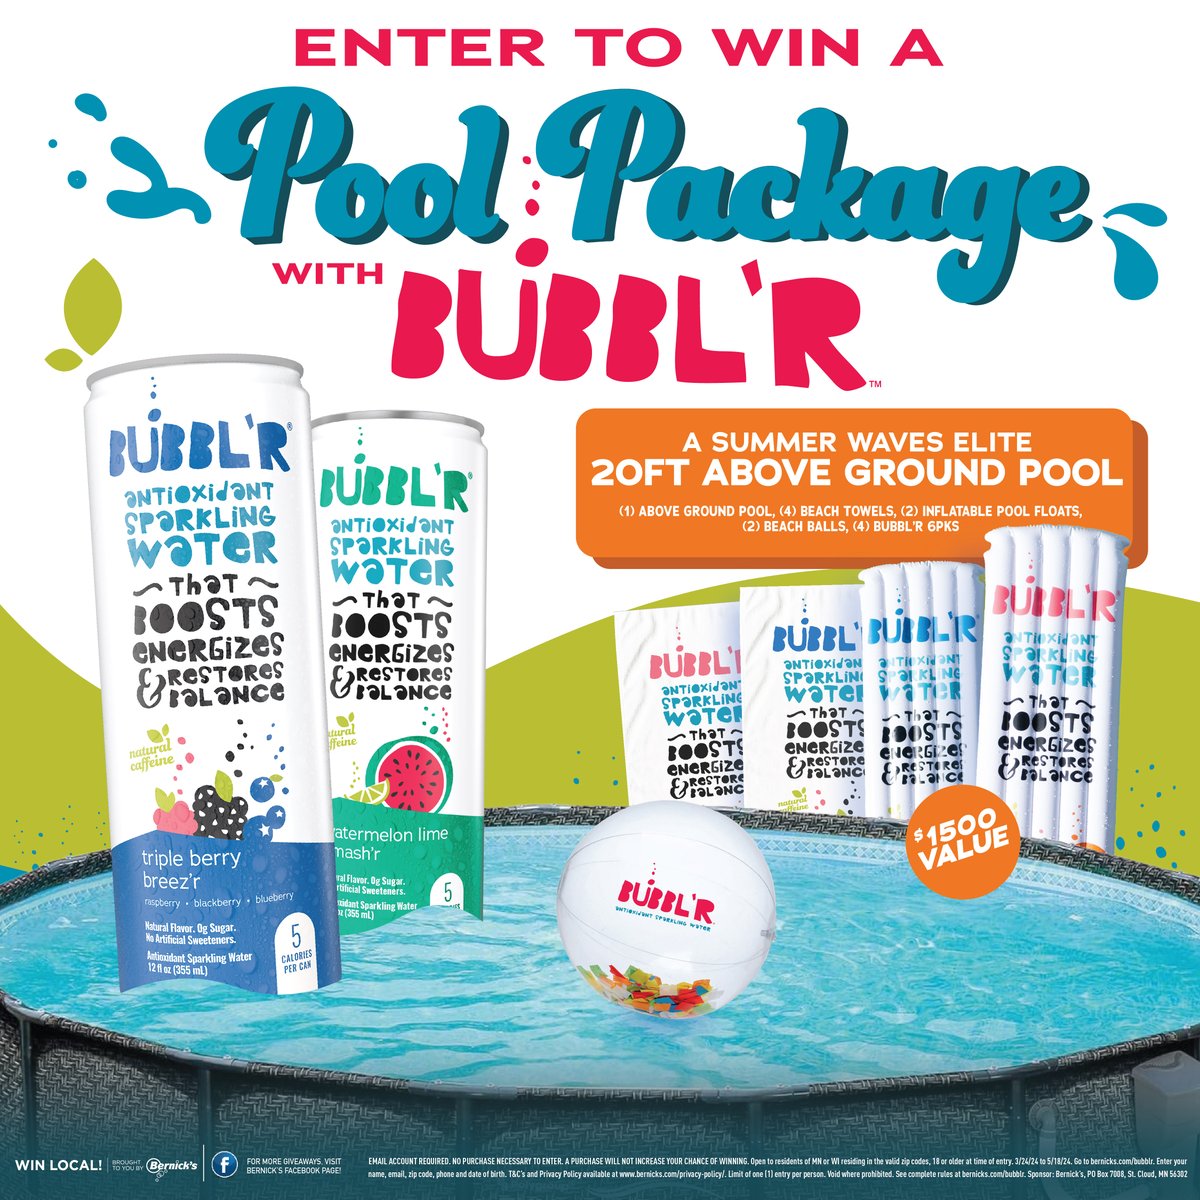 💙 WIN - WIN - WIN 💙 Last chance to sign up to win an amazing Bubbl'r prize pack! Enter to win at: bernicks.co/3PMiuDR